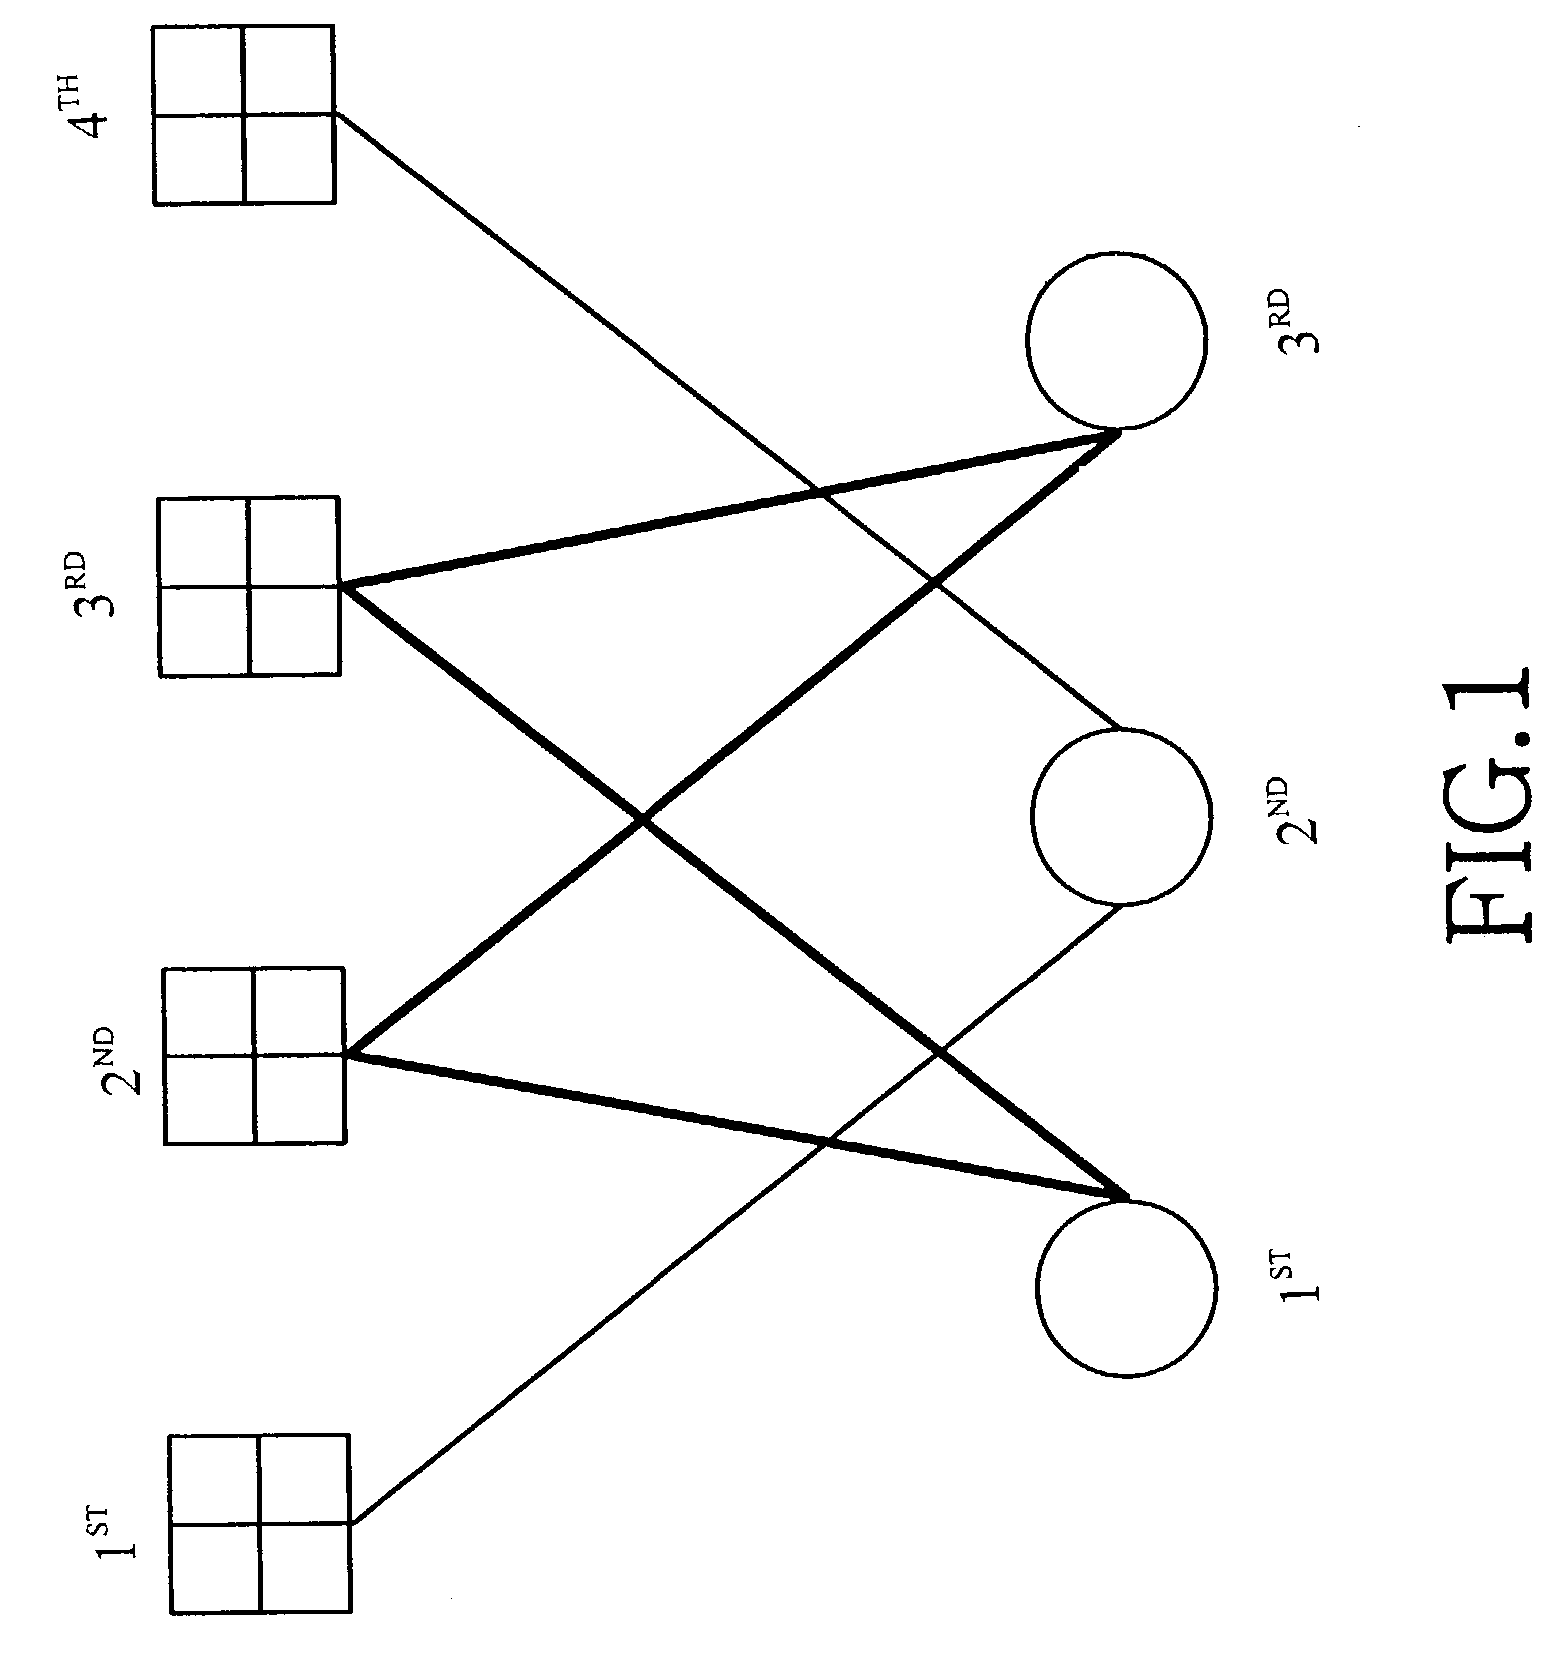 Forward error correction apparatus and method in a high-speed data transmission system